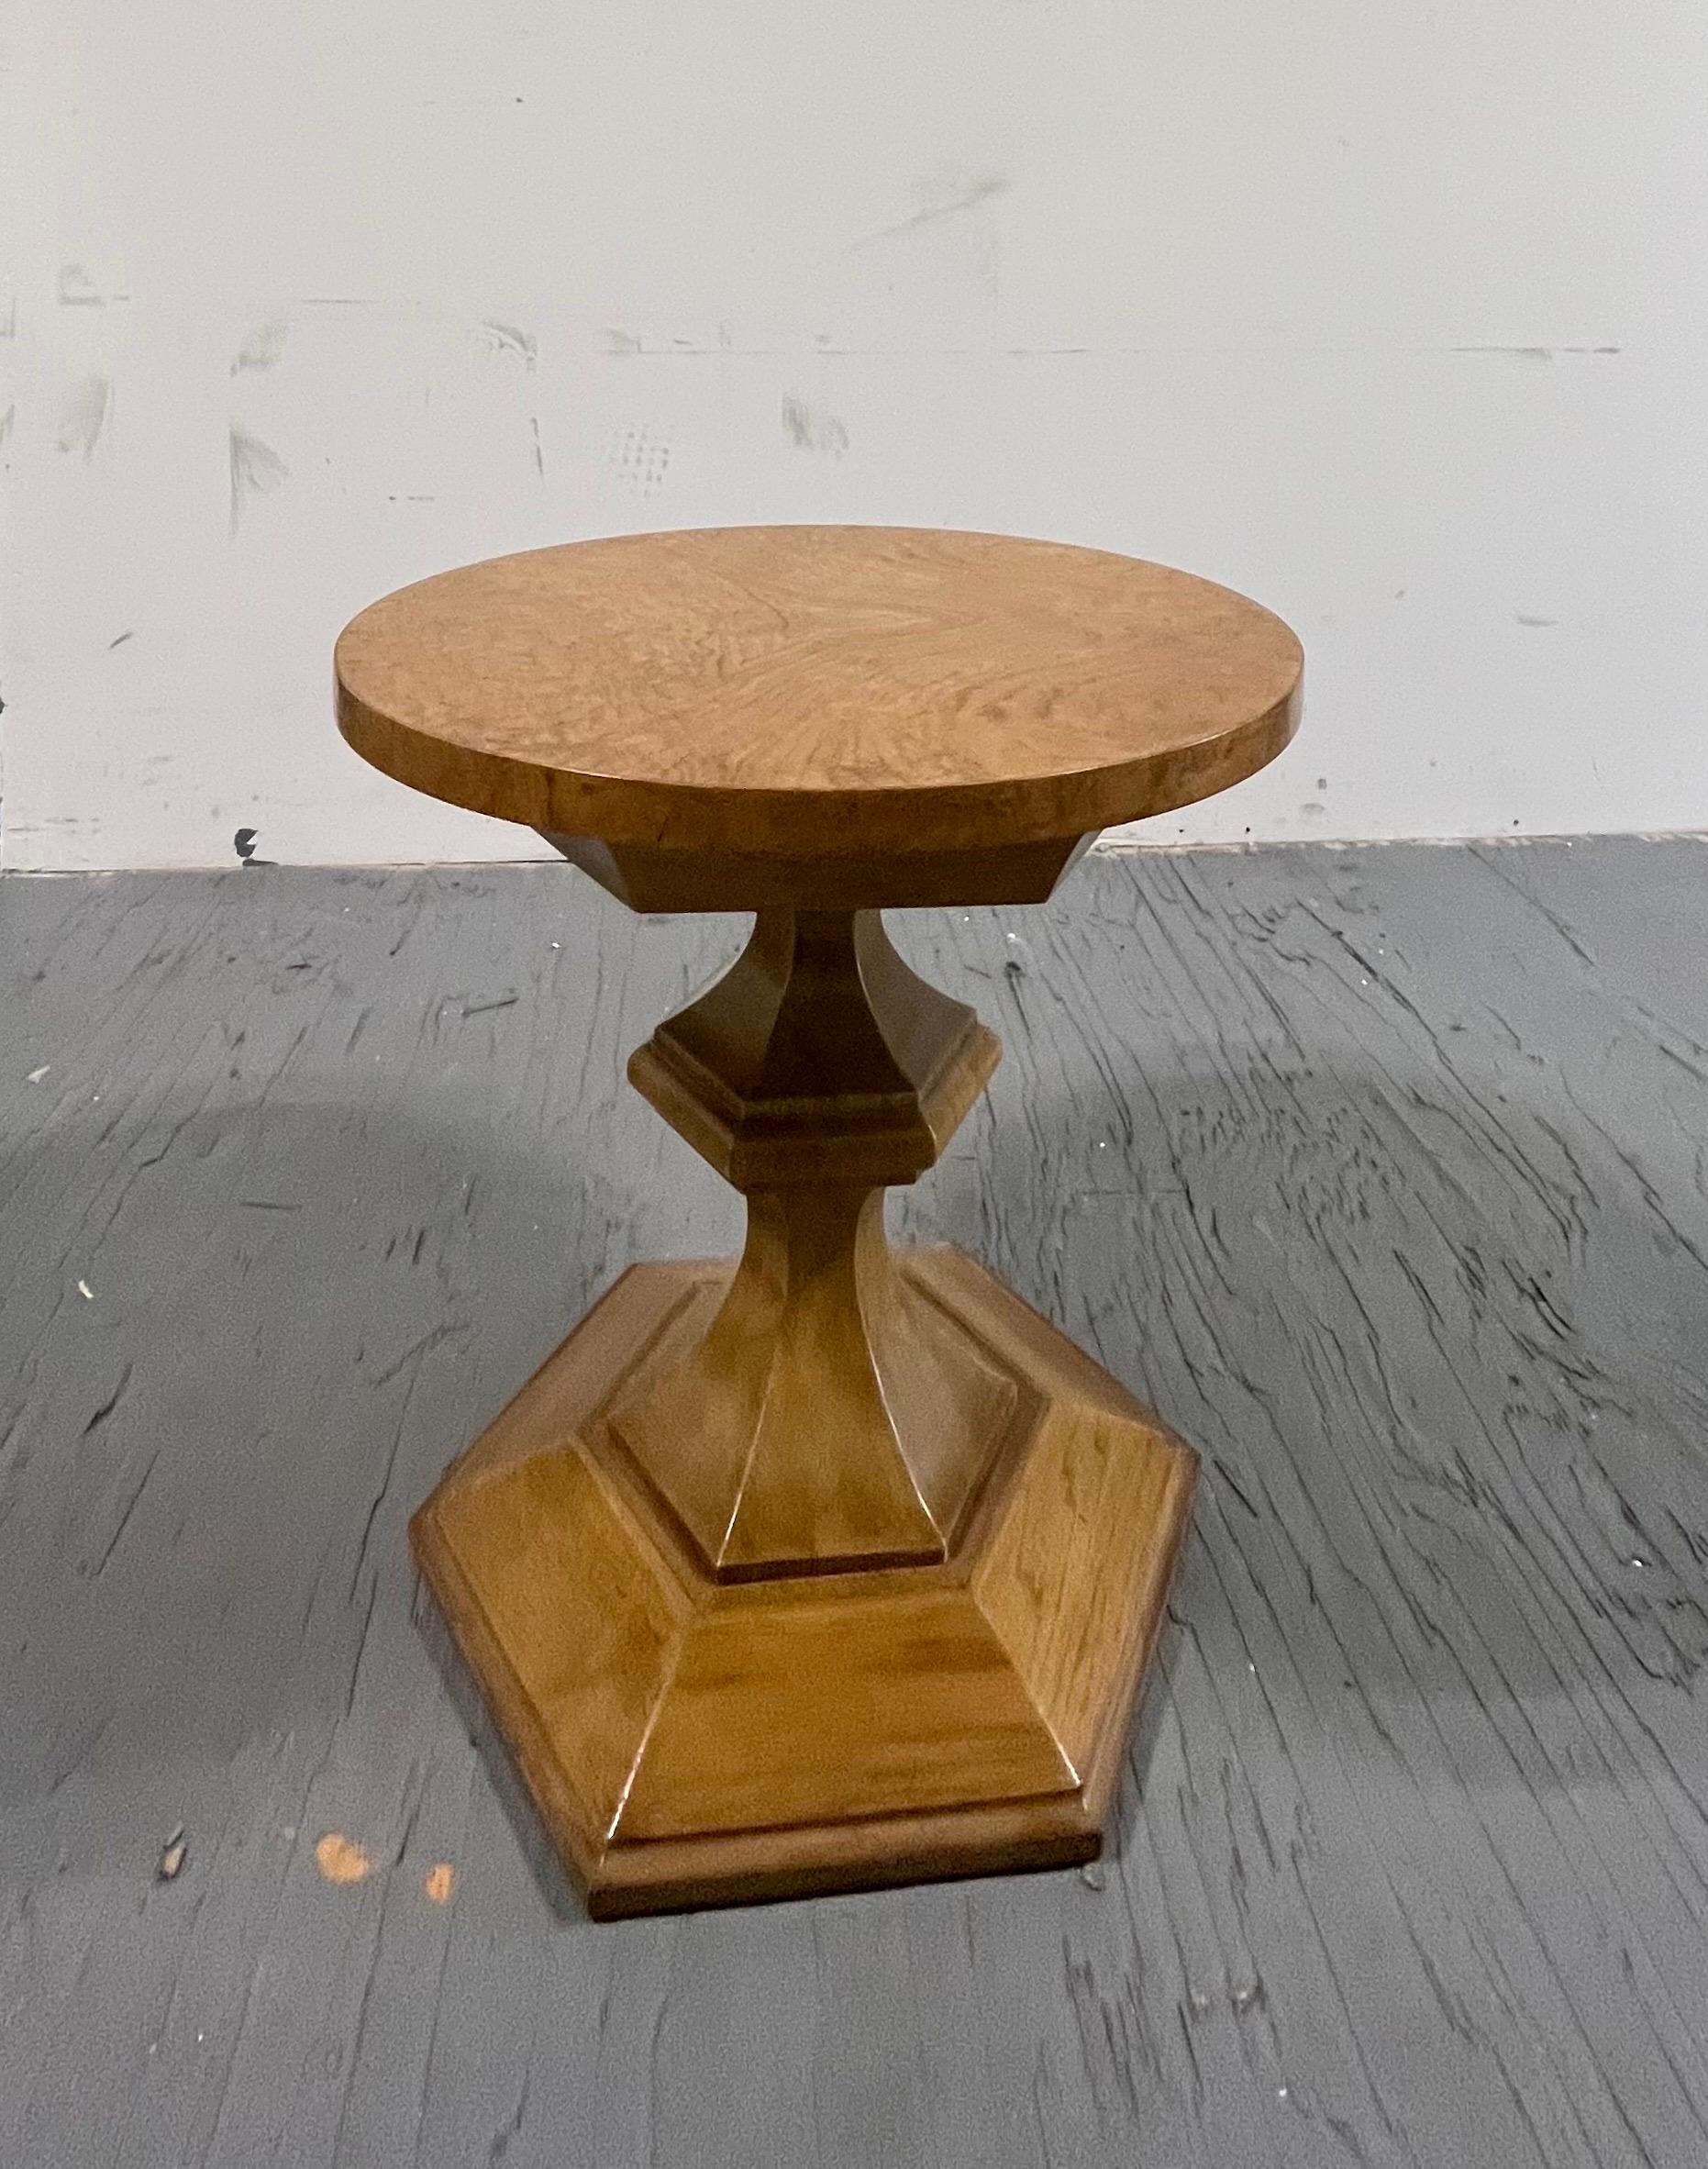 Pavane by Tomlinson Burl Table In Good Condition For Sale In W Allenhurst, NJ